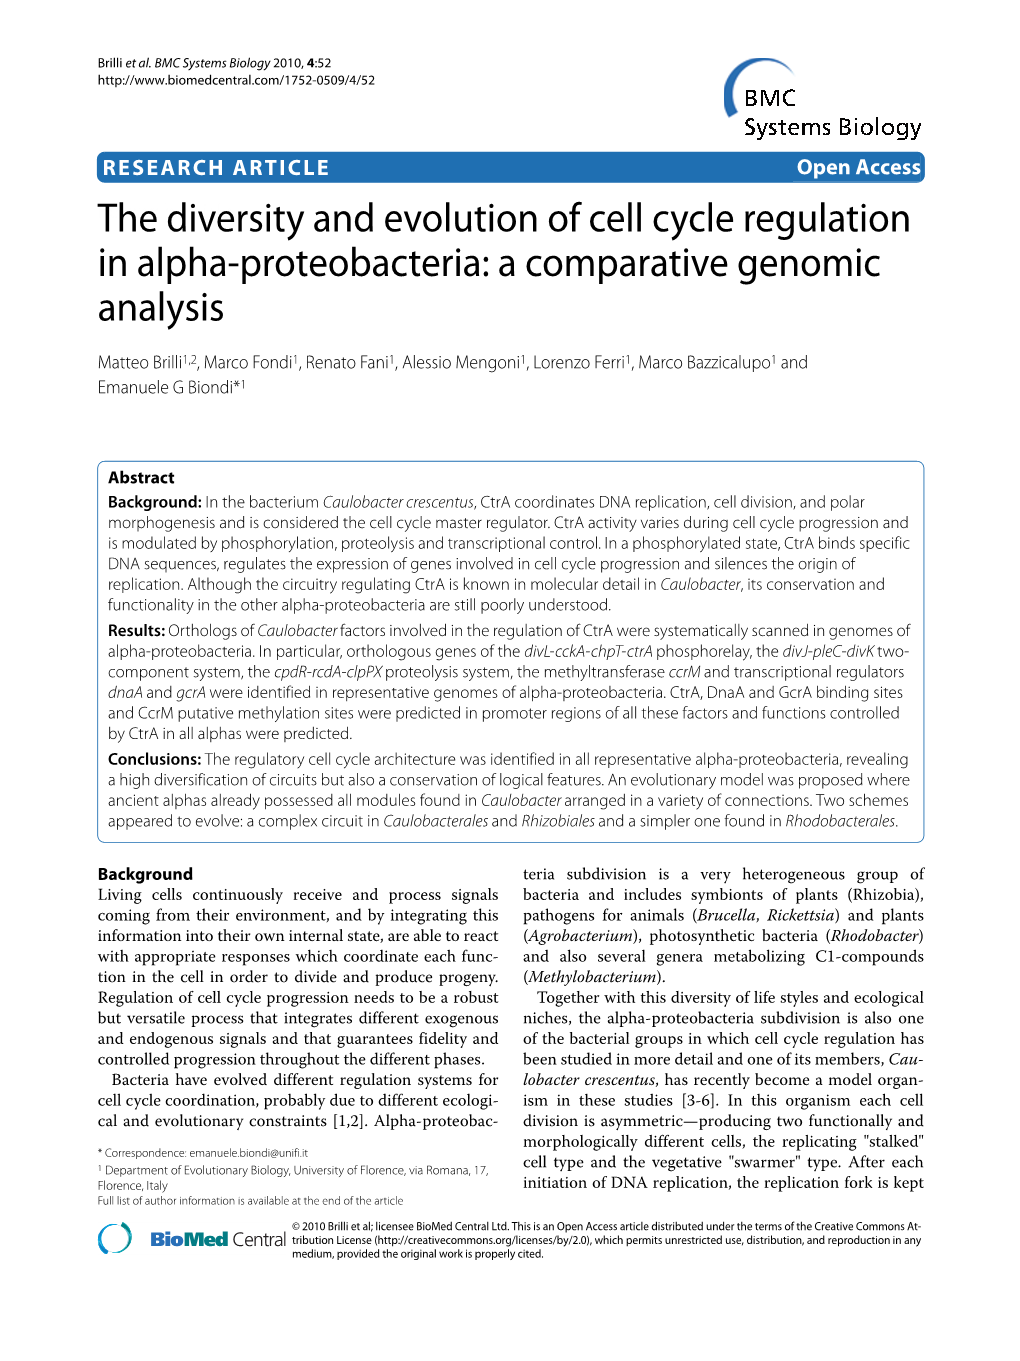 The Diversity and Evolution of Cell Cycle Regulation in Alpha-Proteobacteria: a Comparative Genomic Analysis